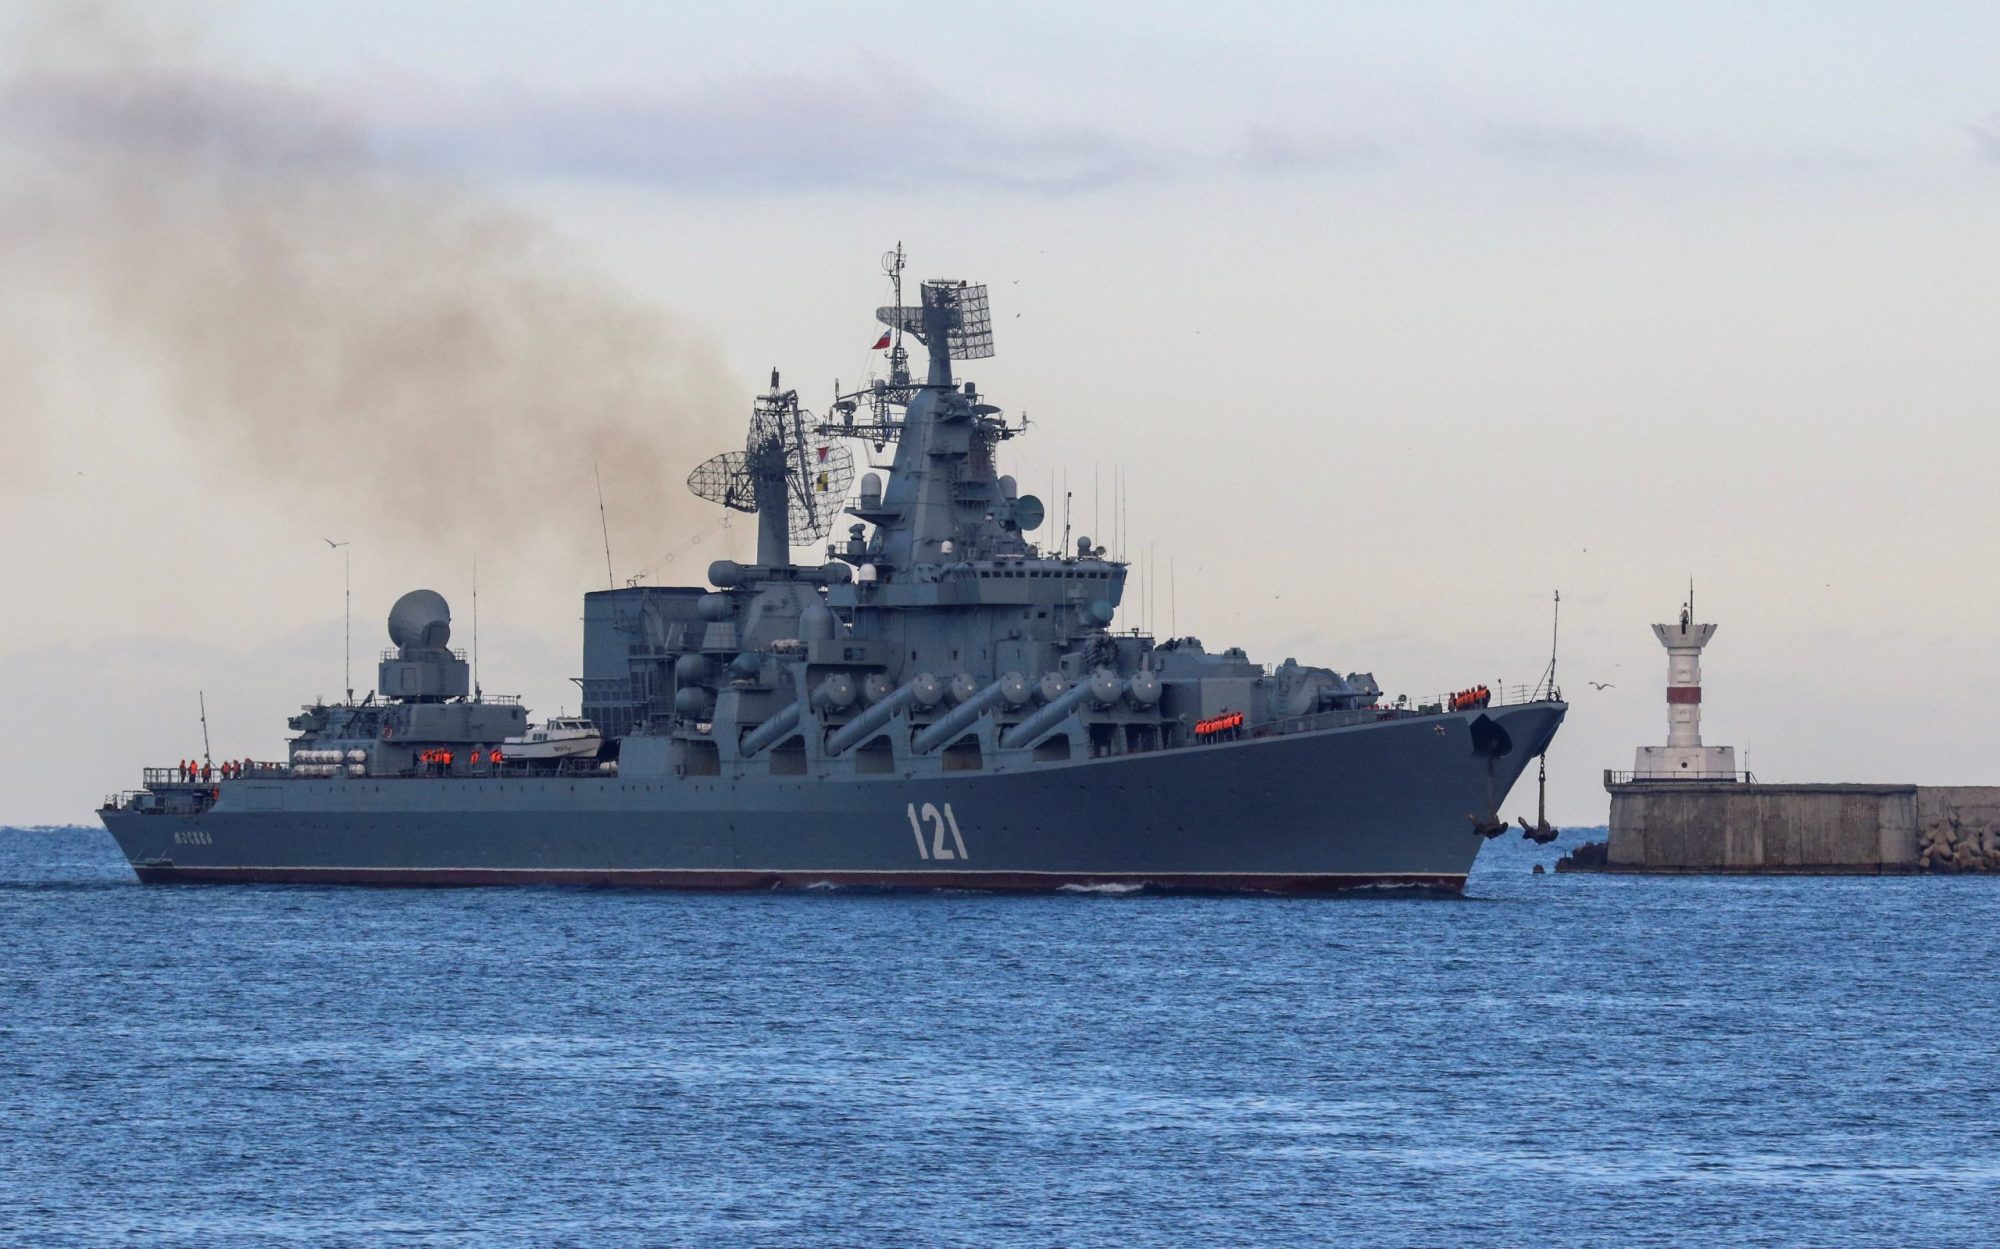 Sudden Increase In Russian Navy Activity In Black Sea - Naval News